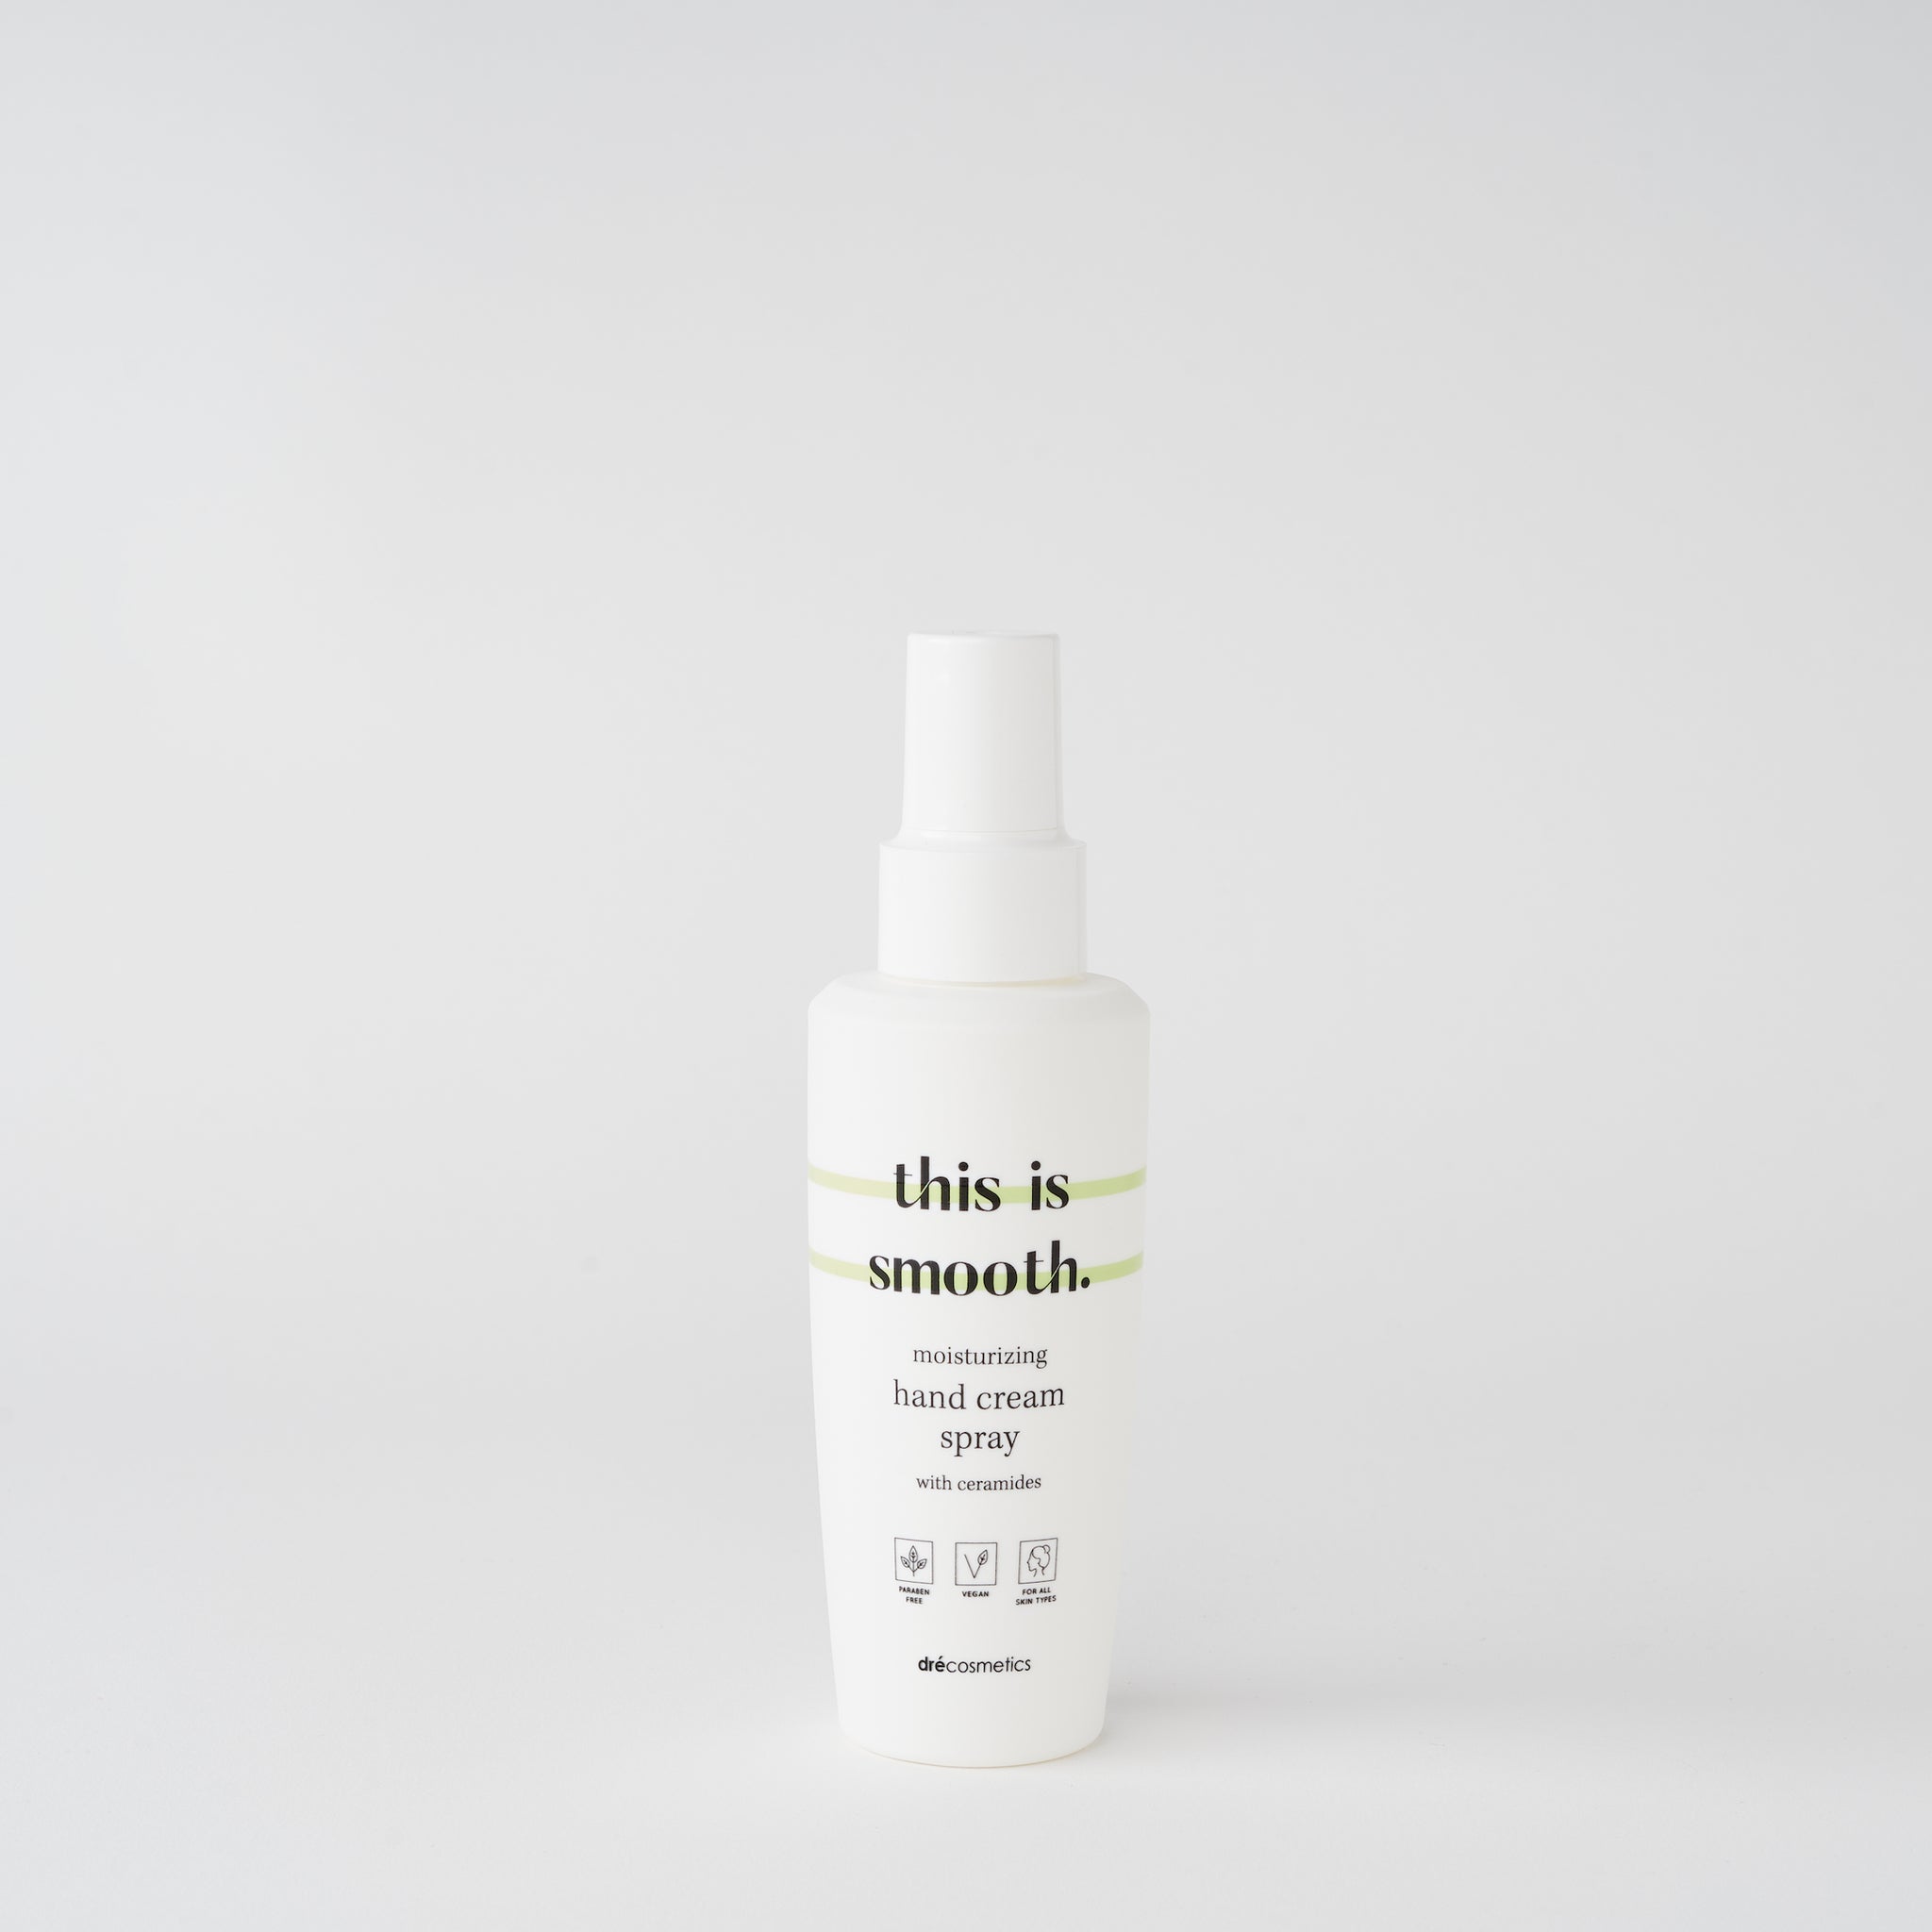 Hand Cream Spray "this is smooth." (6x125ml)